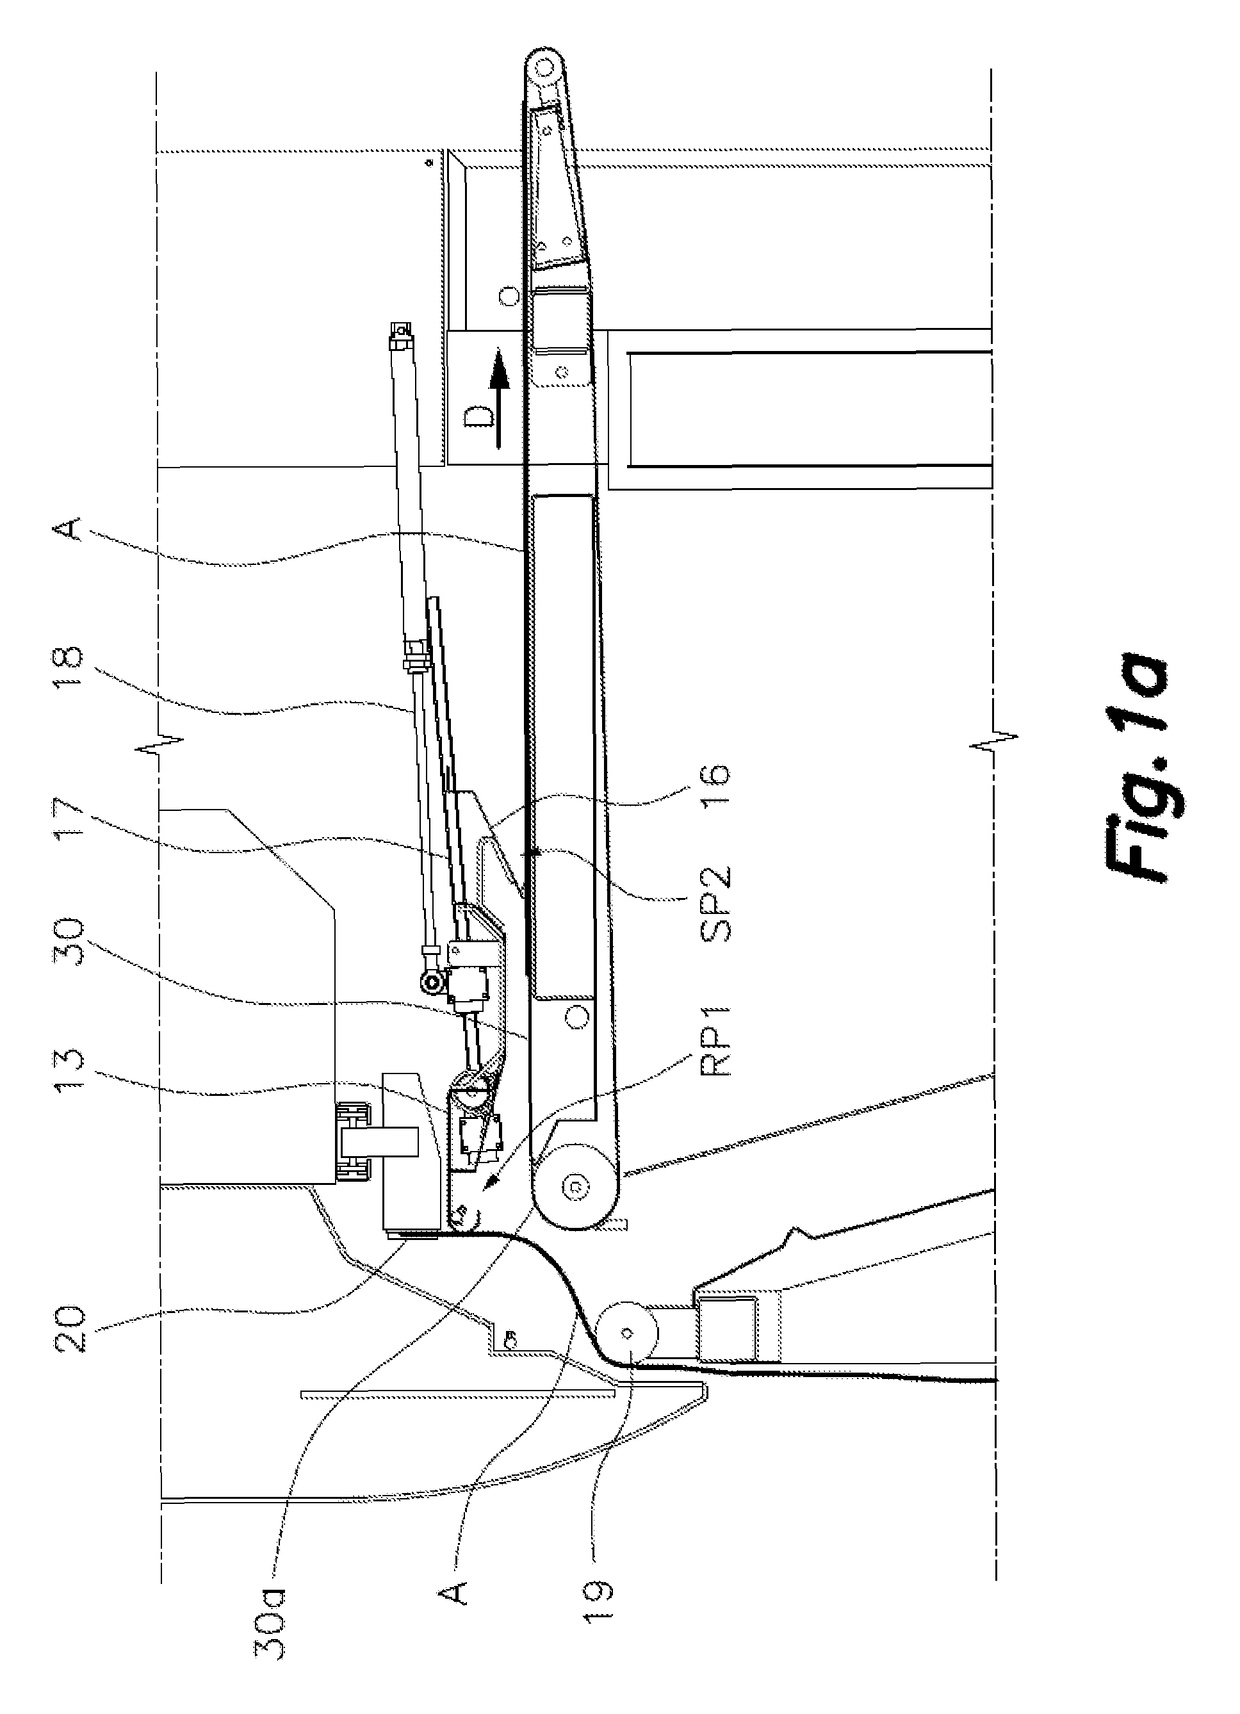 Machine for spreading out and loading flat clothing articles with an auxiliary device that deposits and feeds flat clothing articles on a conveyor belt